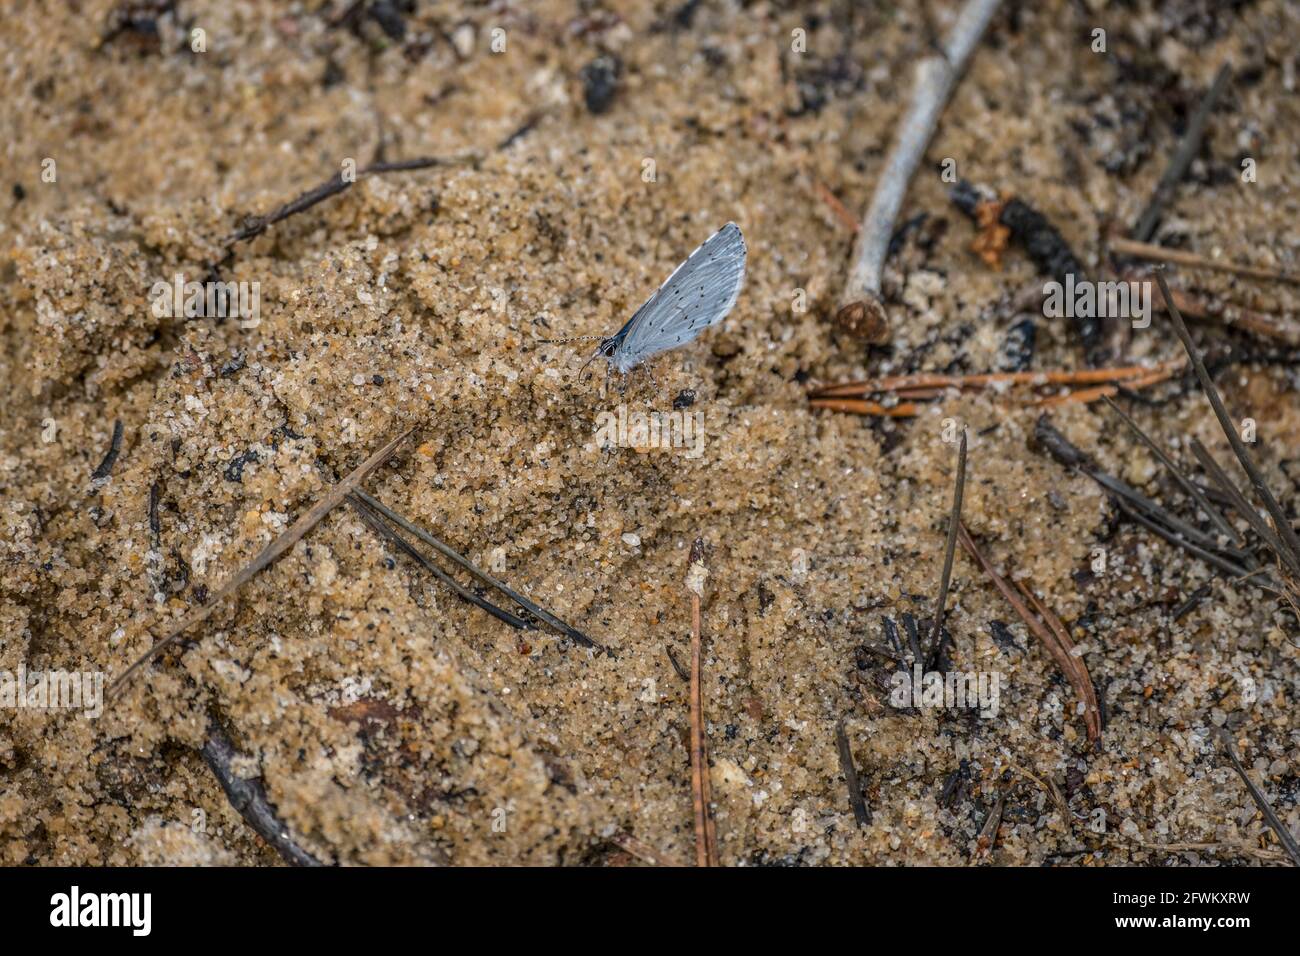 Small blue butterfly crawling on the sand at the beach the smallest of butterflies light blue underneath and dark blue on top with spots Stock Photo